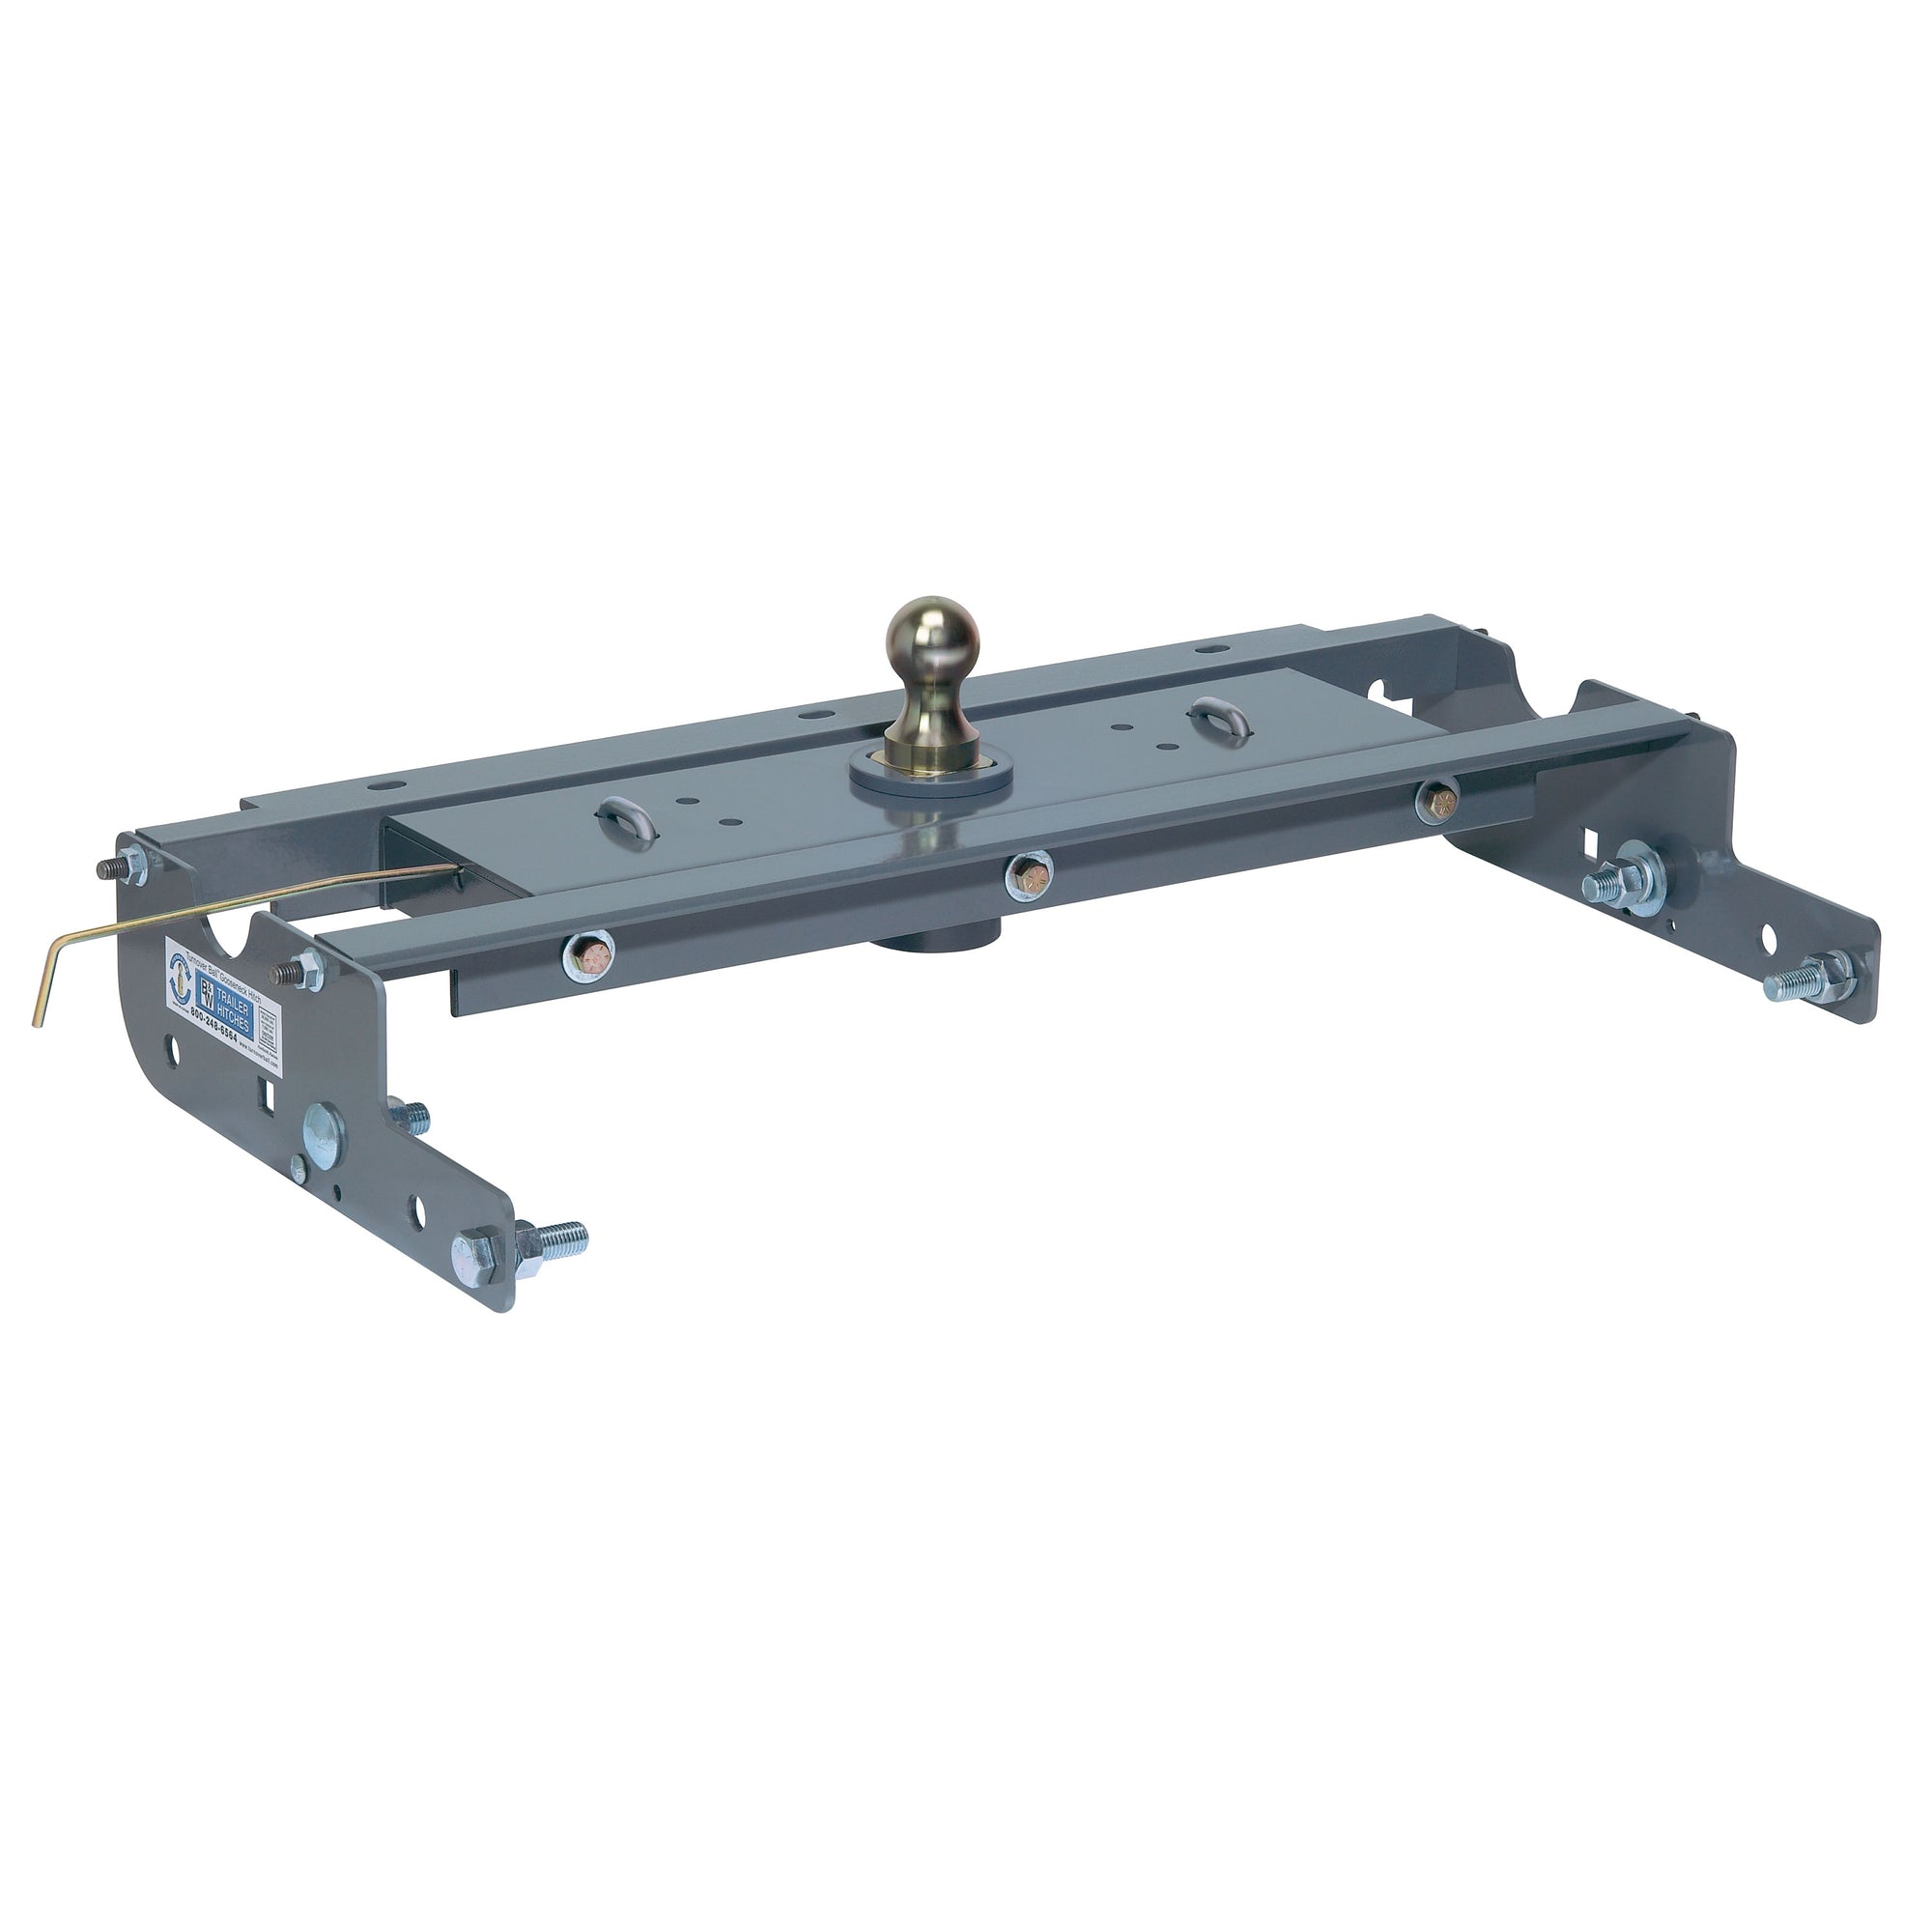 B&W Trailer Hitches GNRK1108 Turnoverball Gooseneck Hitch for Ford 3/4 & 1-Ton Super-Duty (1999-2010), F450 (2008-2010)